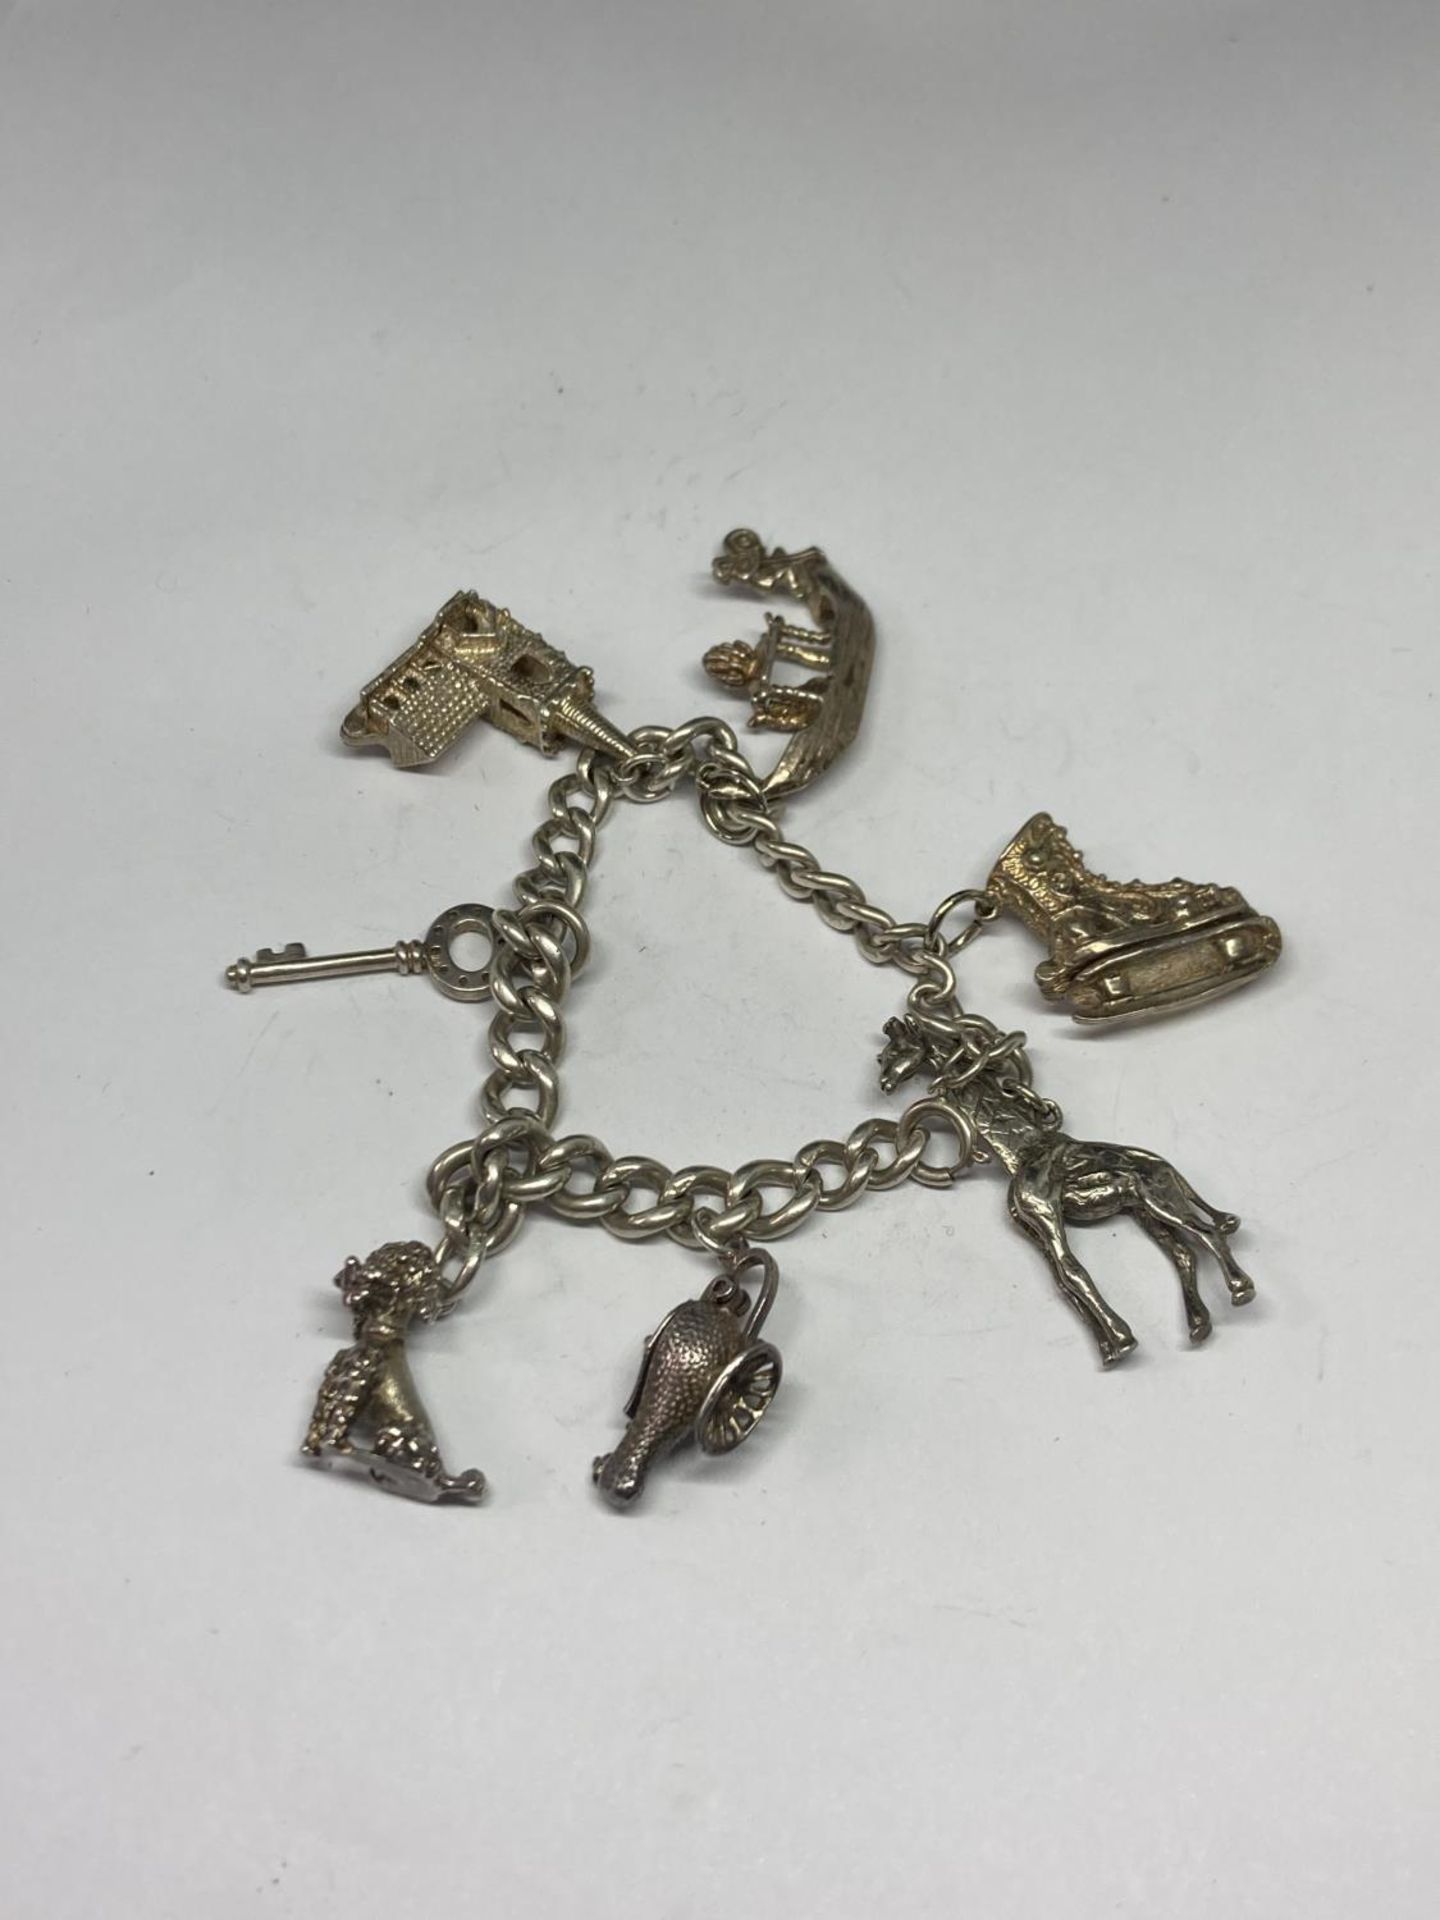 A SILVER CHARM BRACELET WITH SEVEN LARGE CHARMS